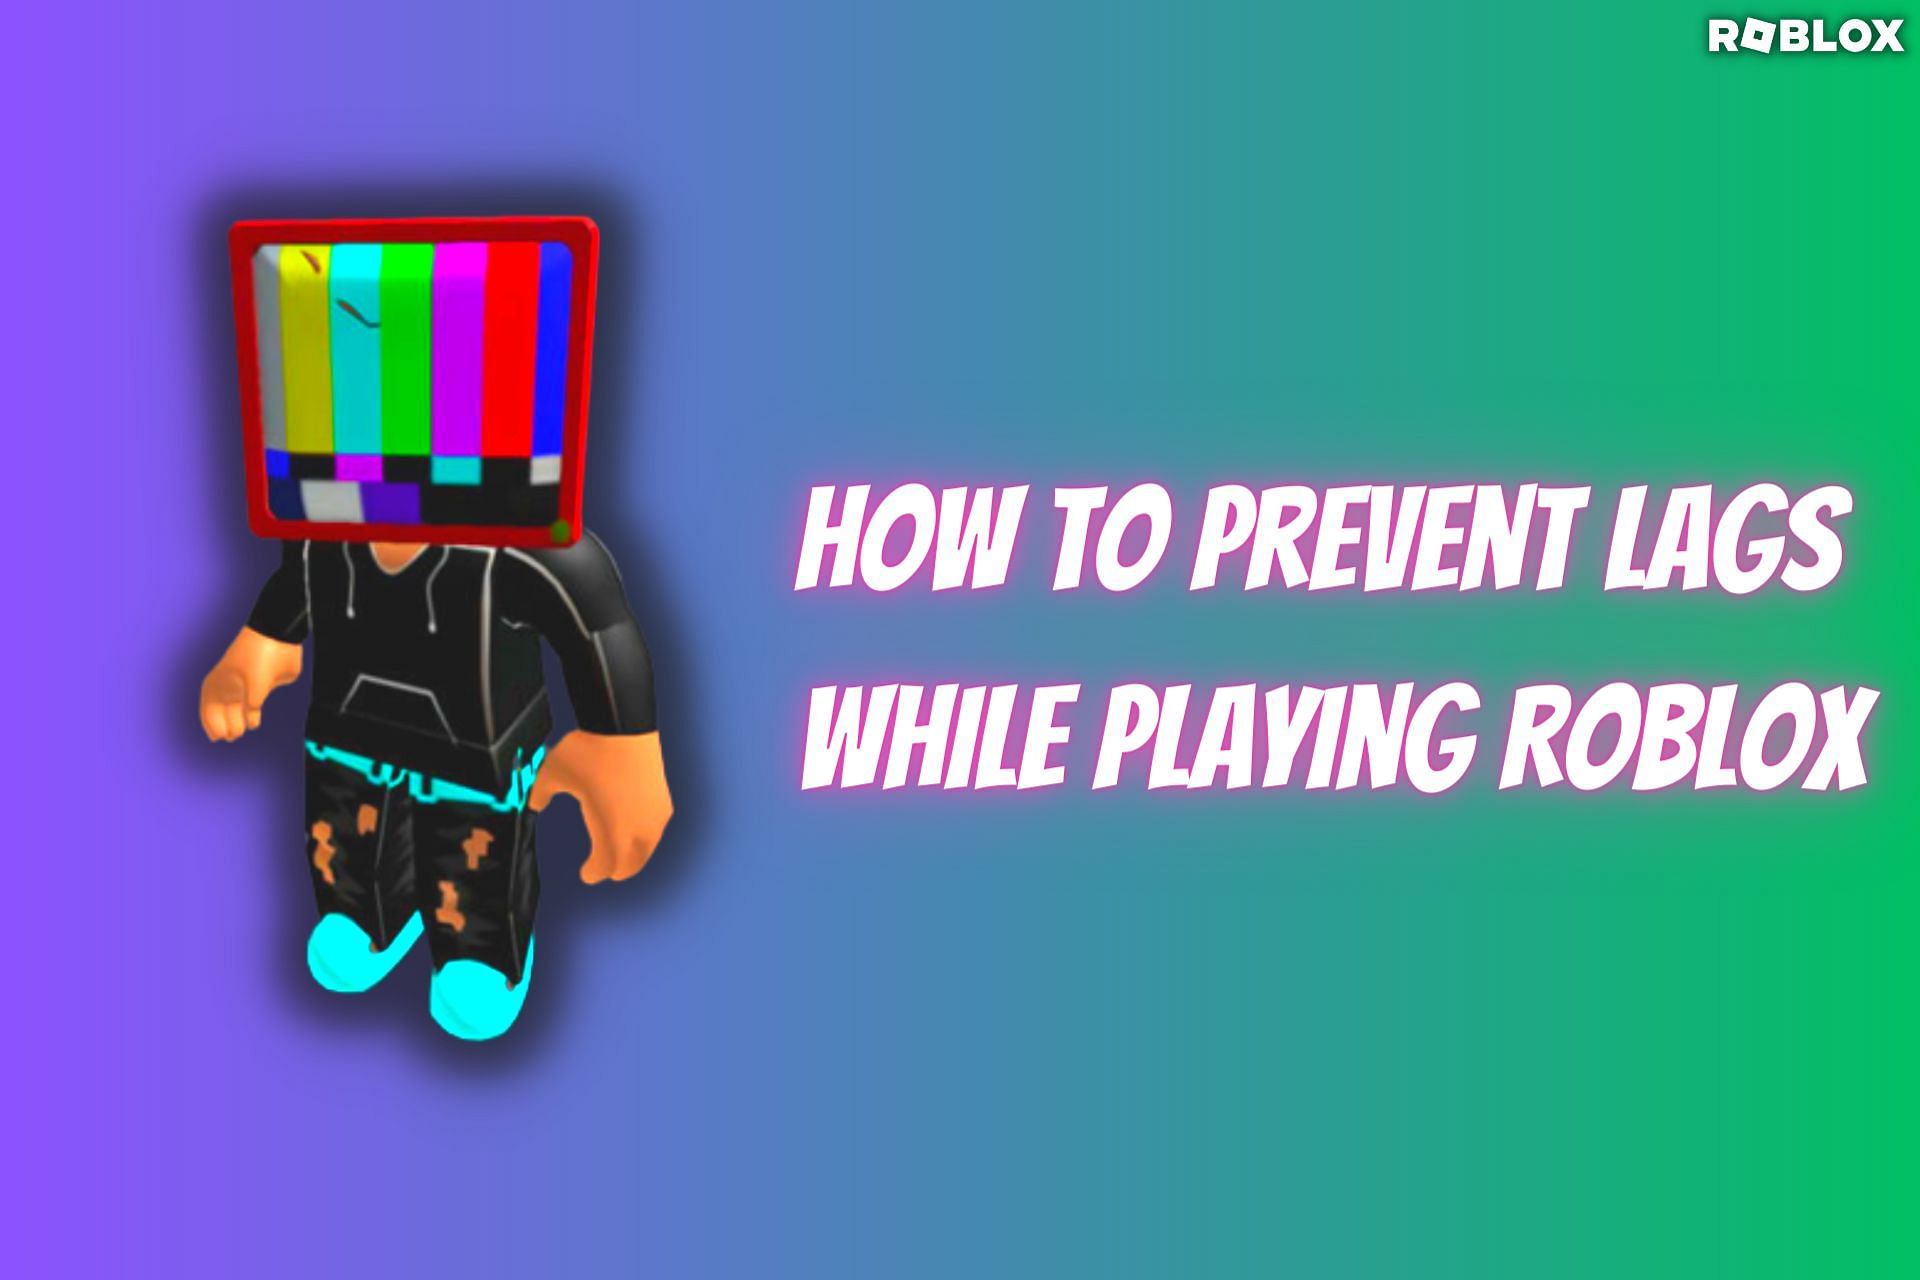 Play your favorite games on Roblox with no hassle (Image via Sportskeeda)